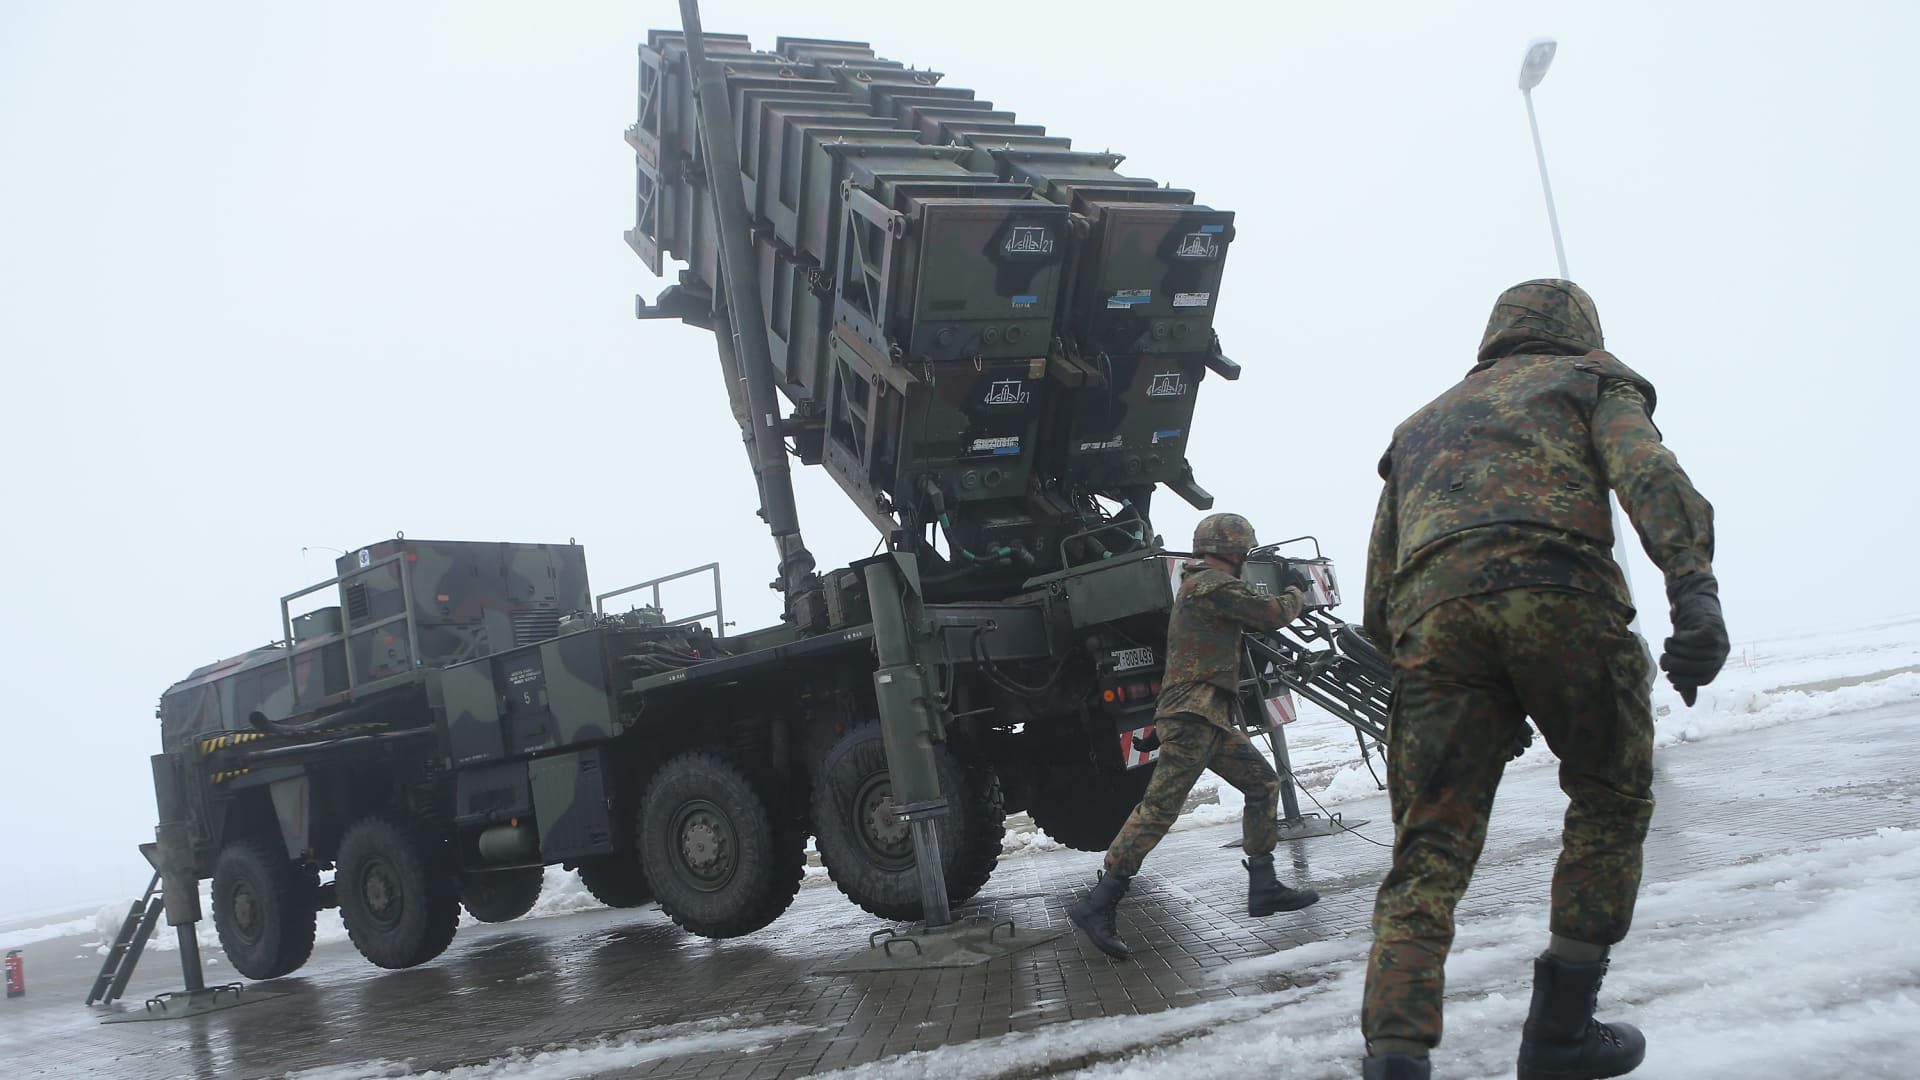 Members of the German Bundeswehr prepare a Patriot missile launching system during a press day presentation at the Luftwaffe Warbelow training center on December 18, 2012 in Warbelow, Germany.